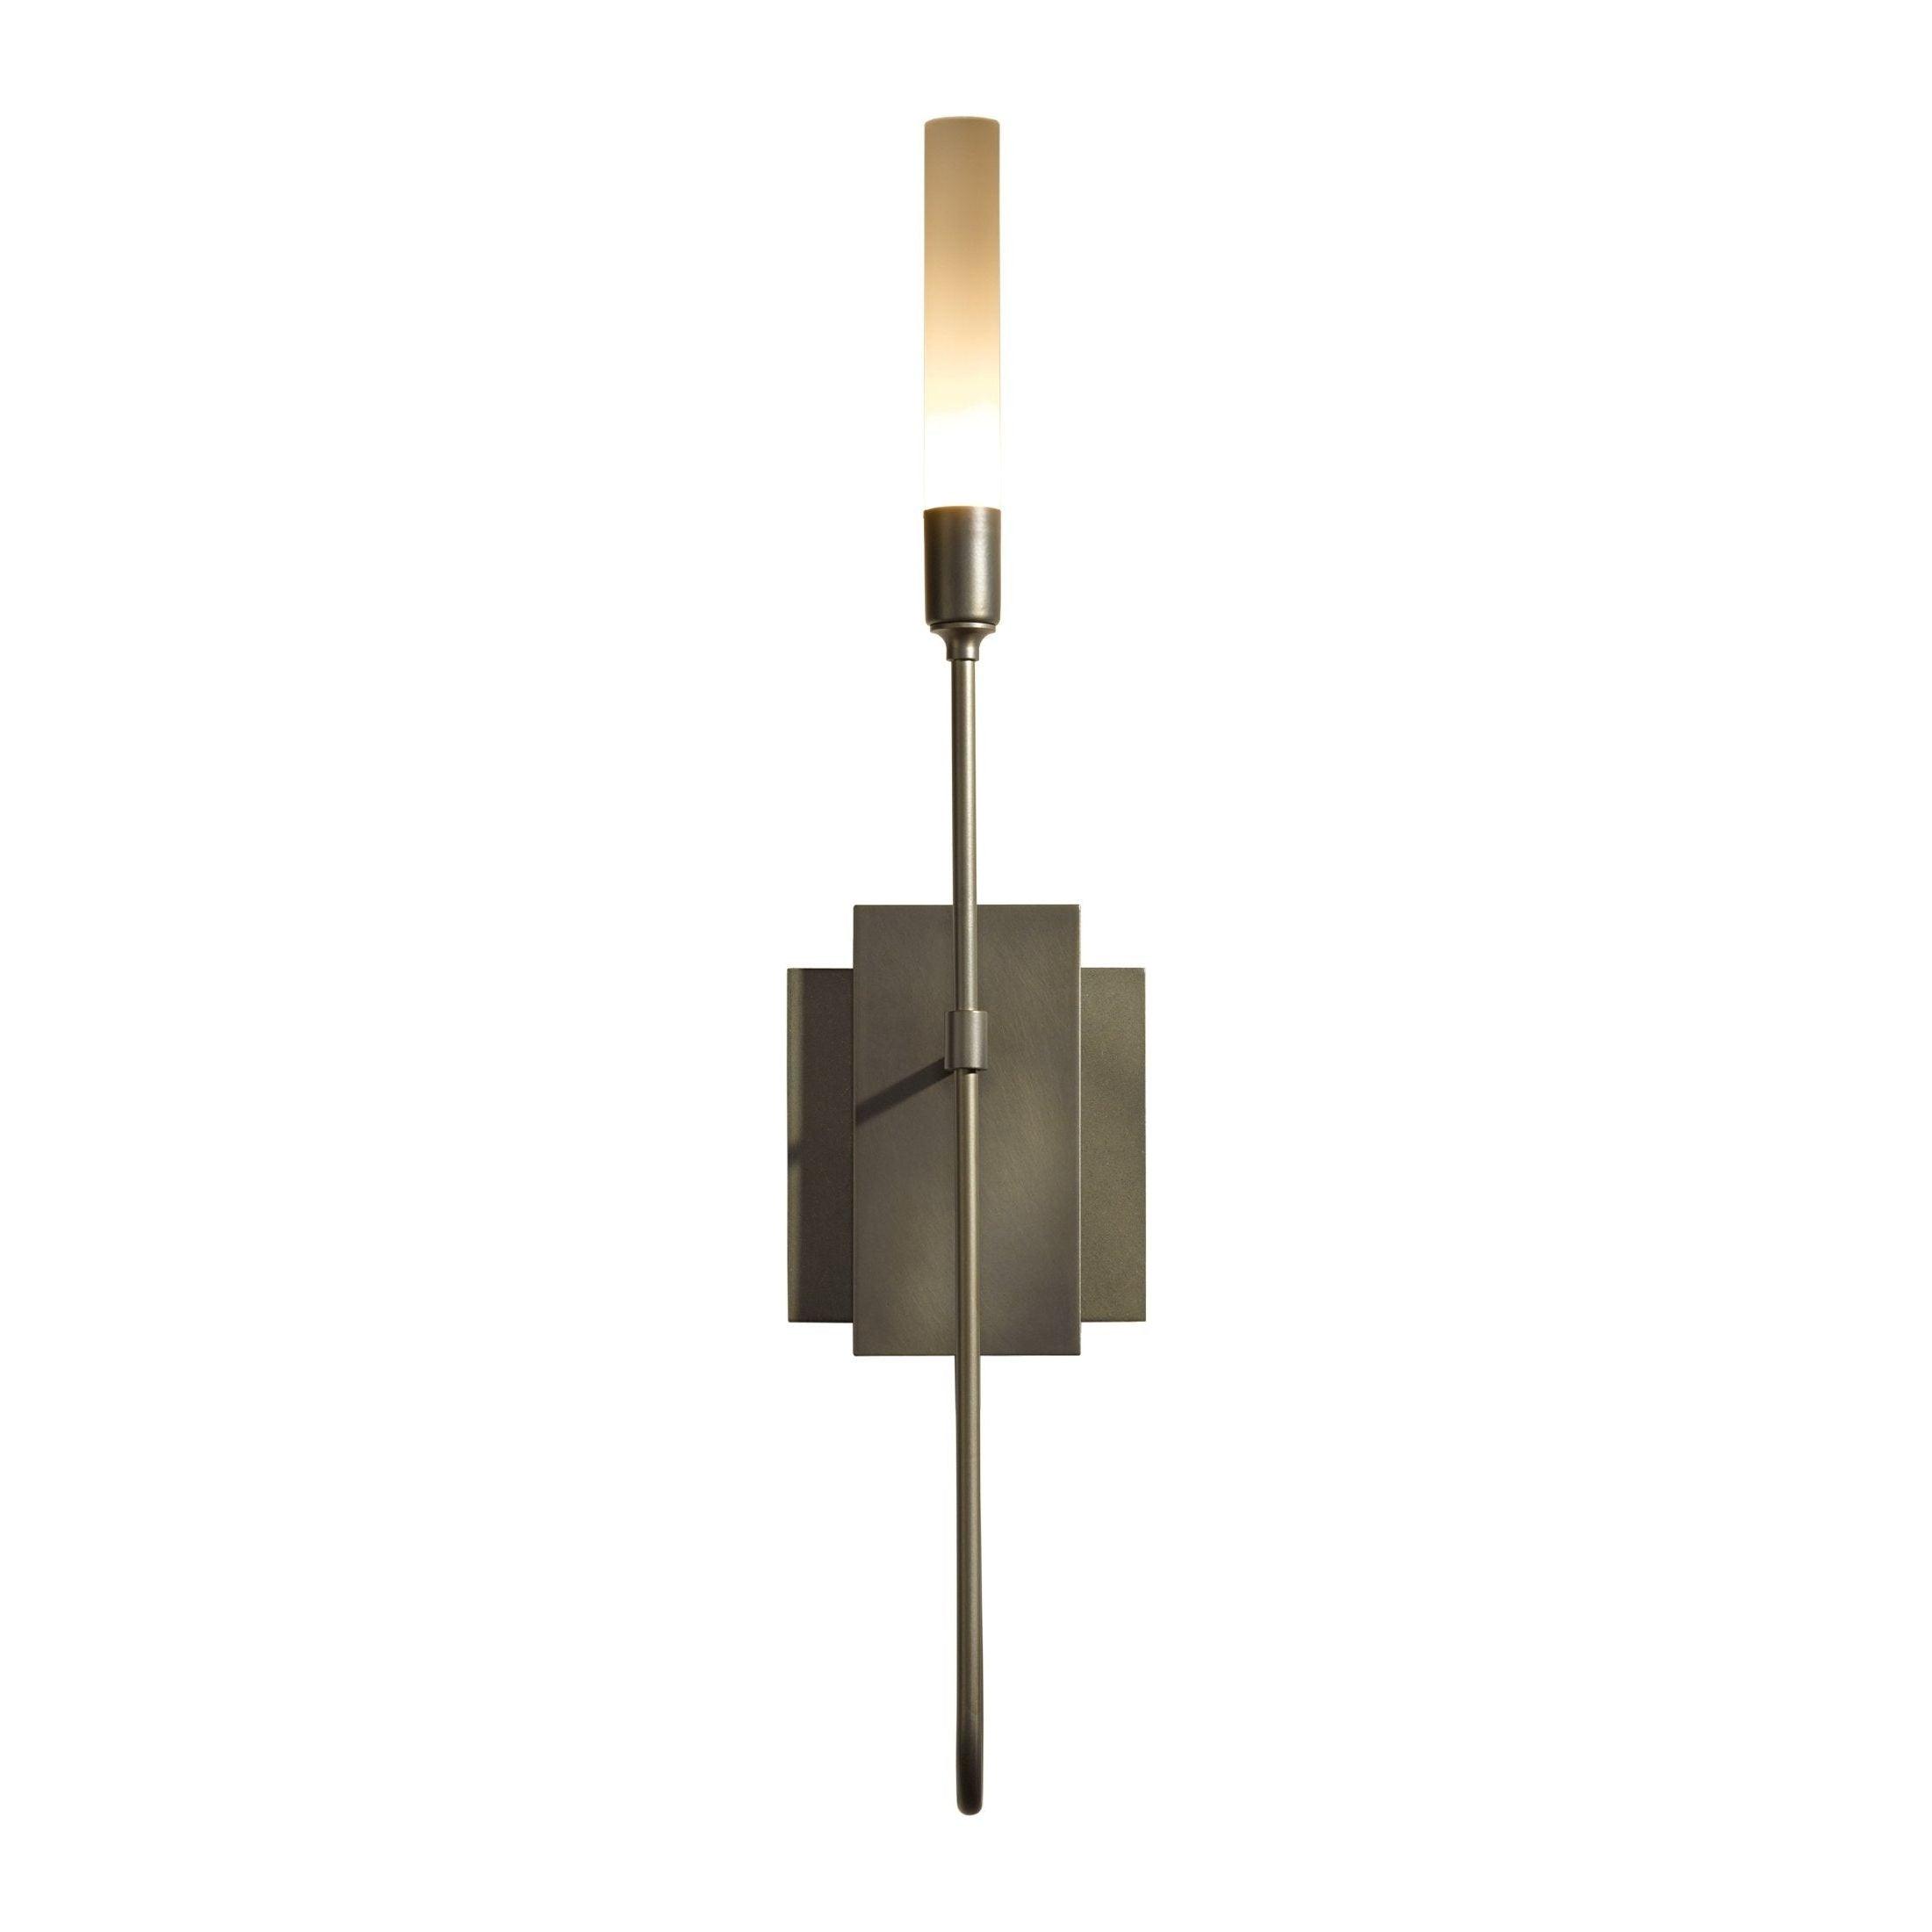 Hubbardton Forge - Lisse Sconce - Lights Canada